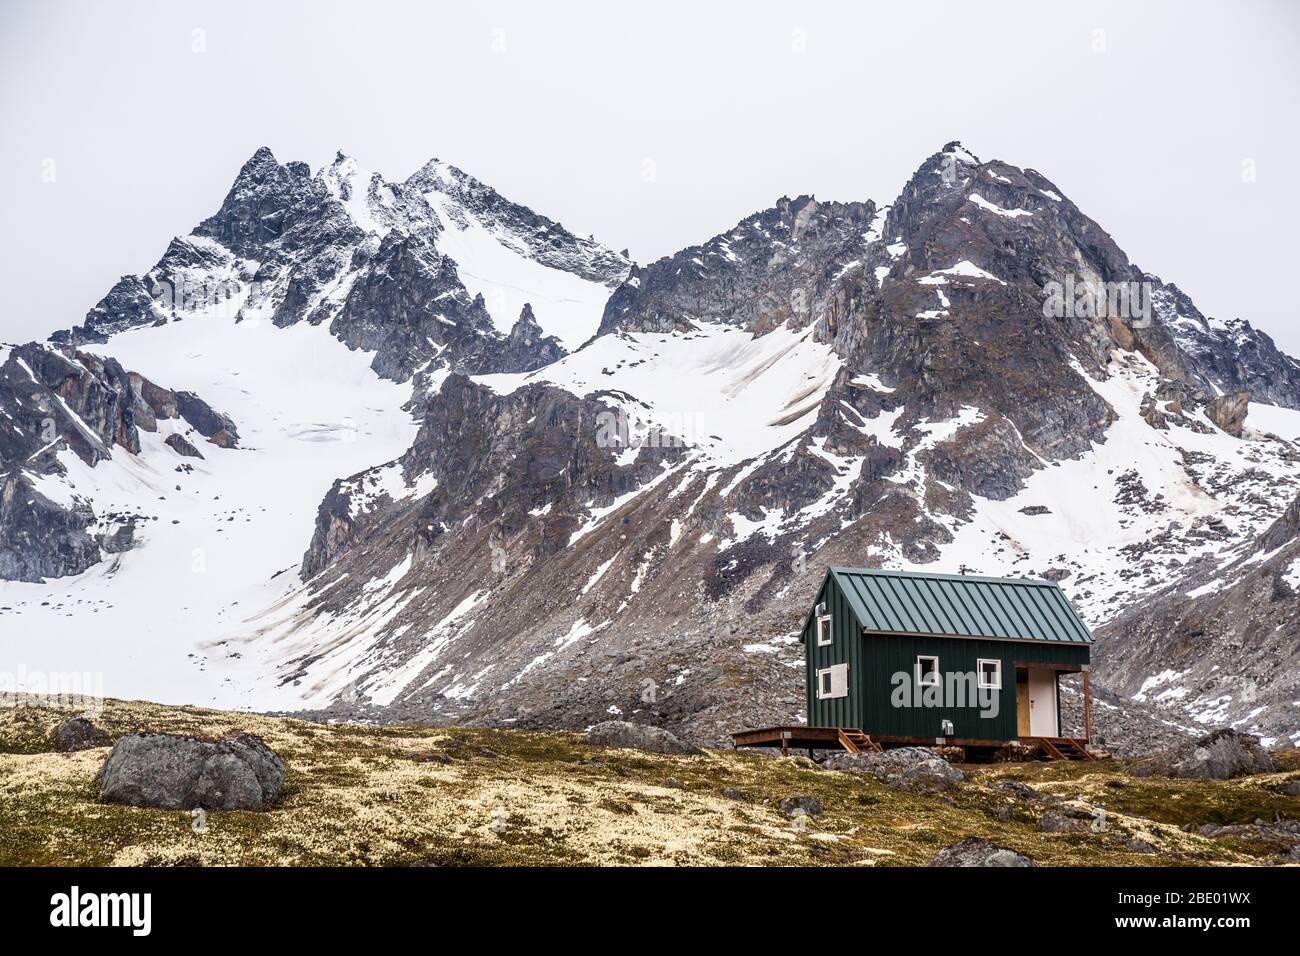 A small green building in the Alaskan wilderness provides shelter for backcountry skiers and hikers in the Talkeetna Mountain Range. Stock Photo